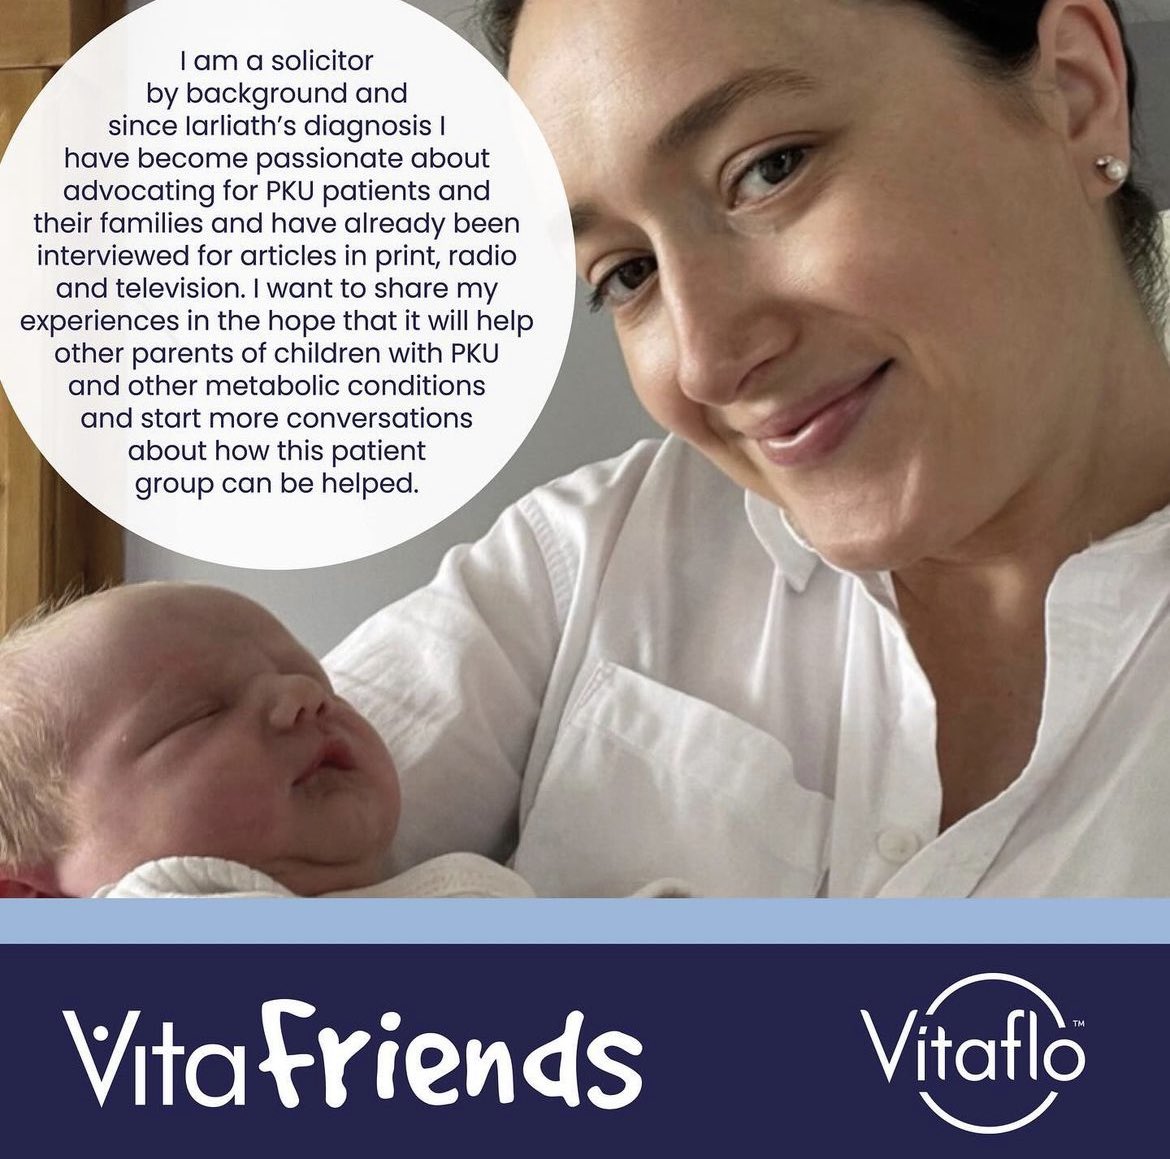 Such an honour to have been selected as a Vitaflo Parent Ambassador. I will be travelling to the @NSPKU annual conference in Birmingham with the Vitaflo Team tomorrow. #pku #lowprotein #brainhealth #vitaflo #nspku